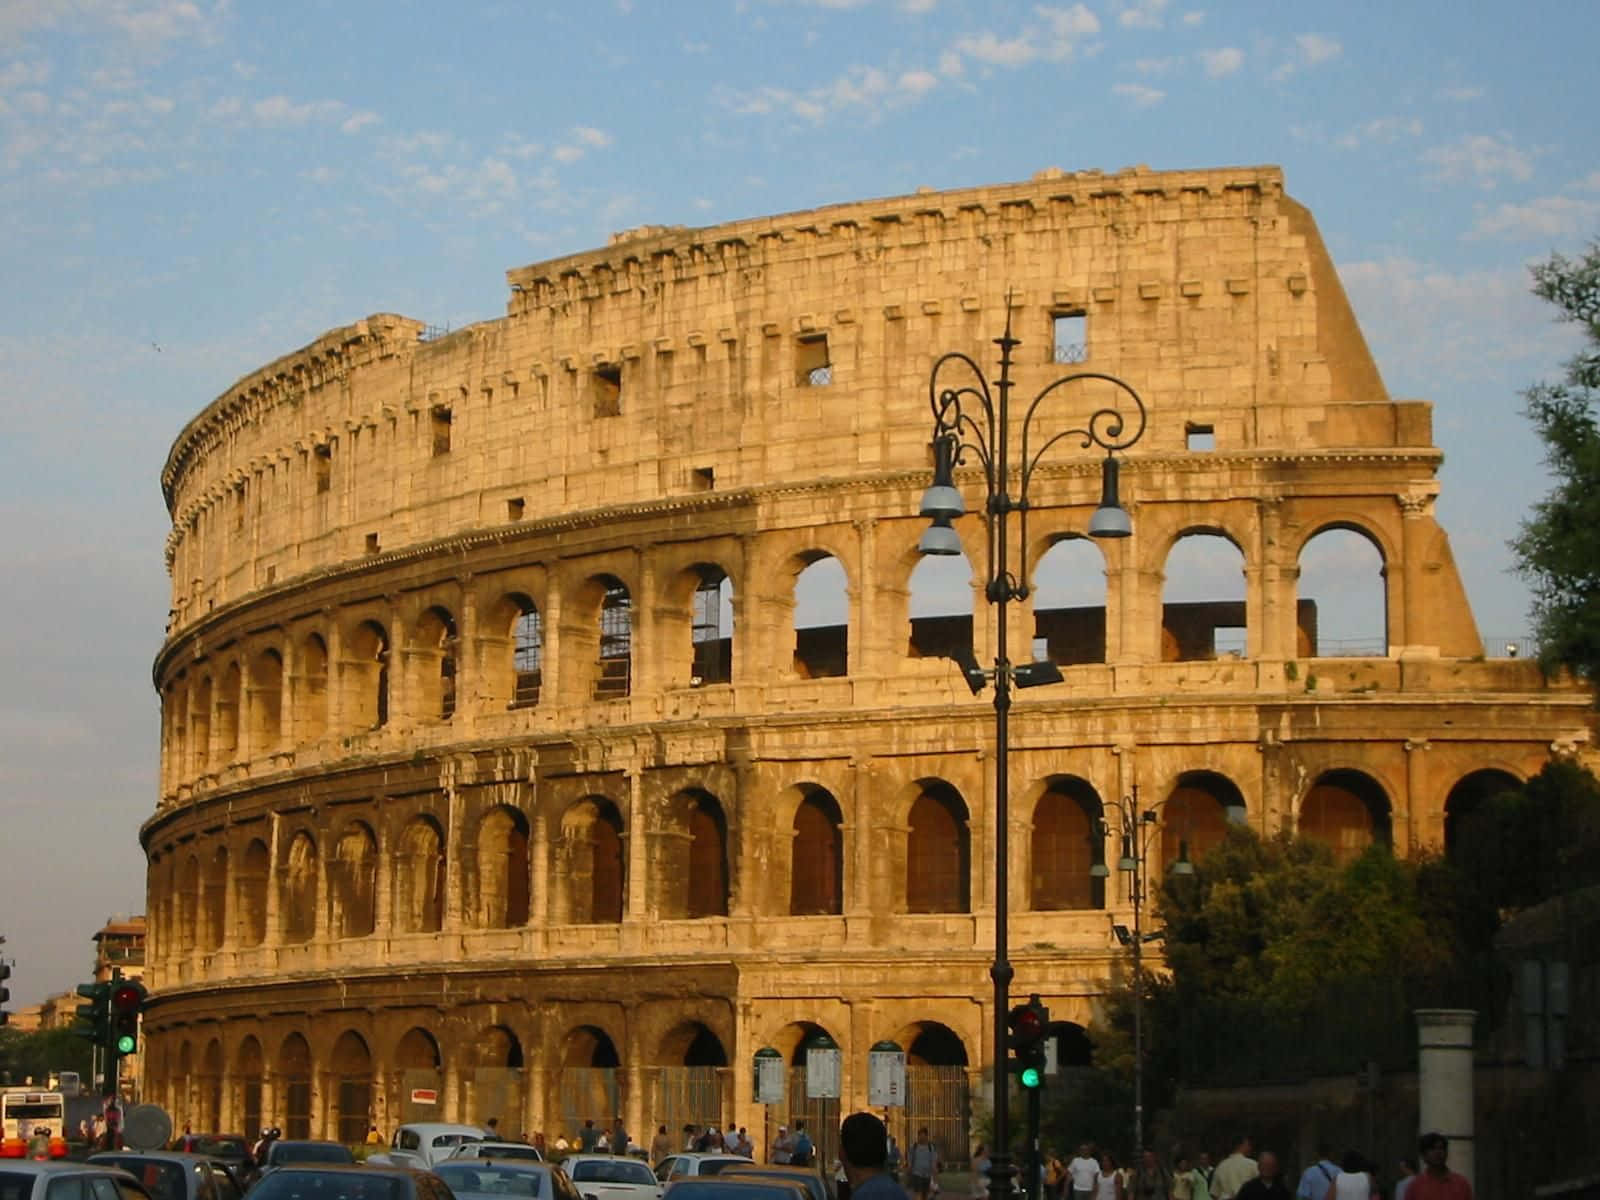 The Colosseum, the ancient marvel of Rome.